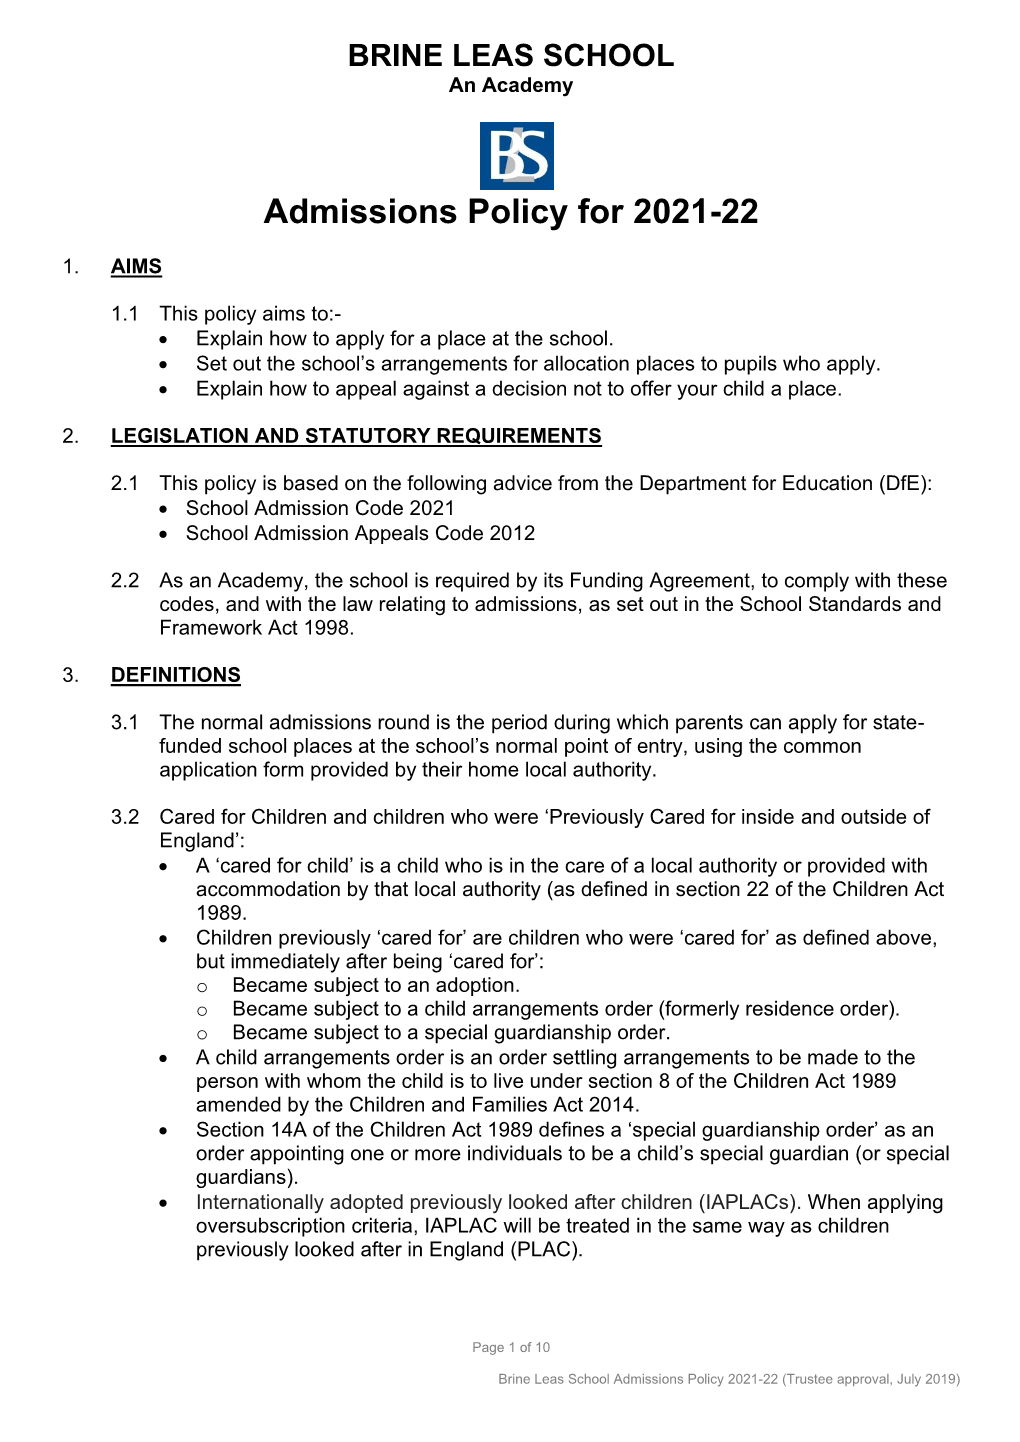 Admissions Policy for 2021-22